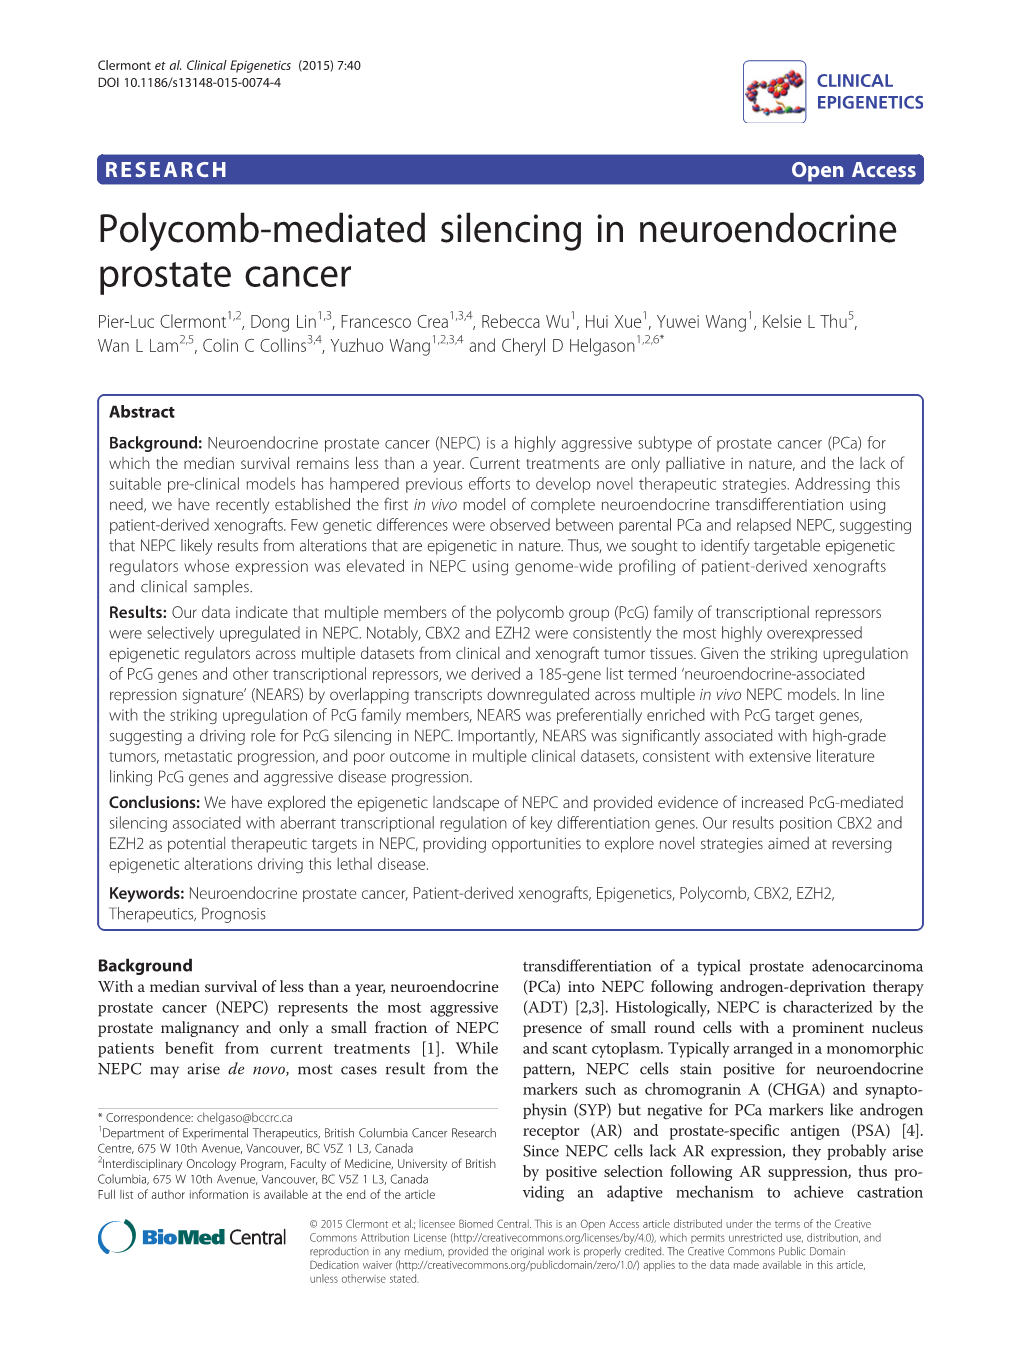 Polycomb-Mediated Silencing in Neuroendocrine Prostate Cancer